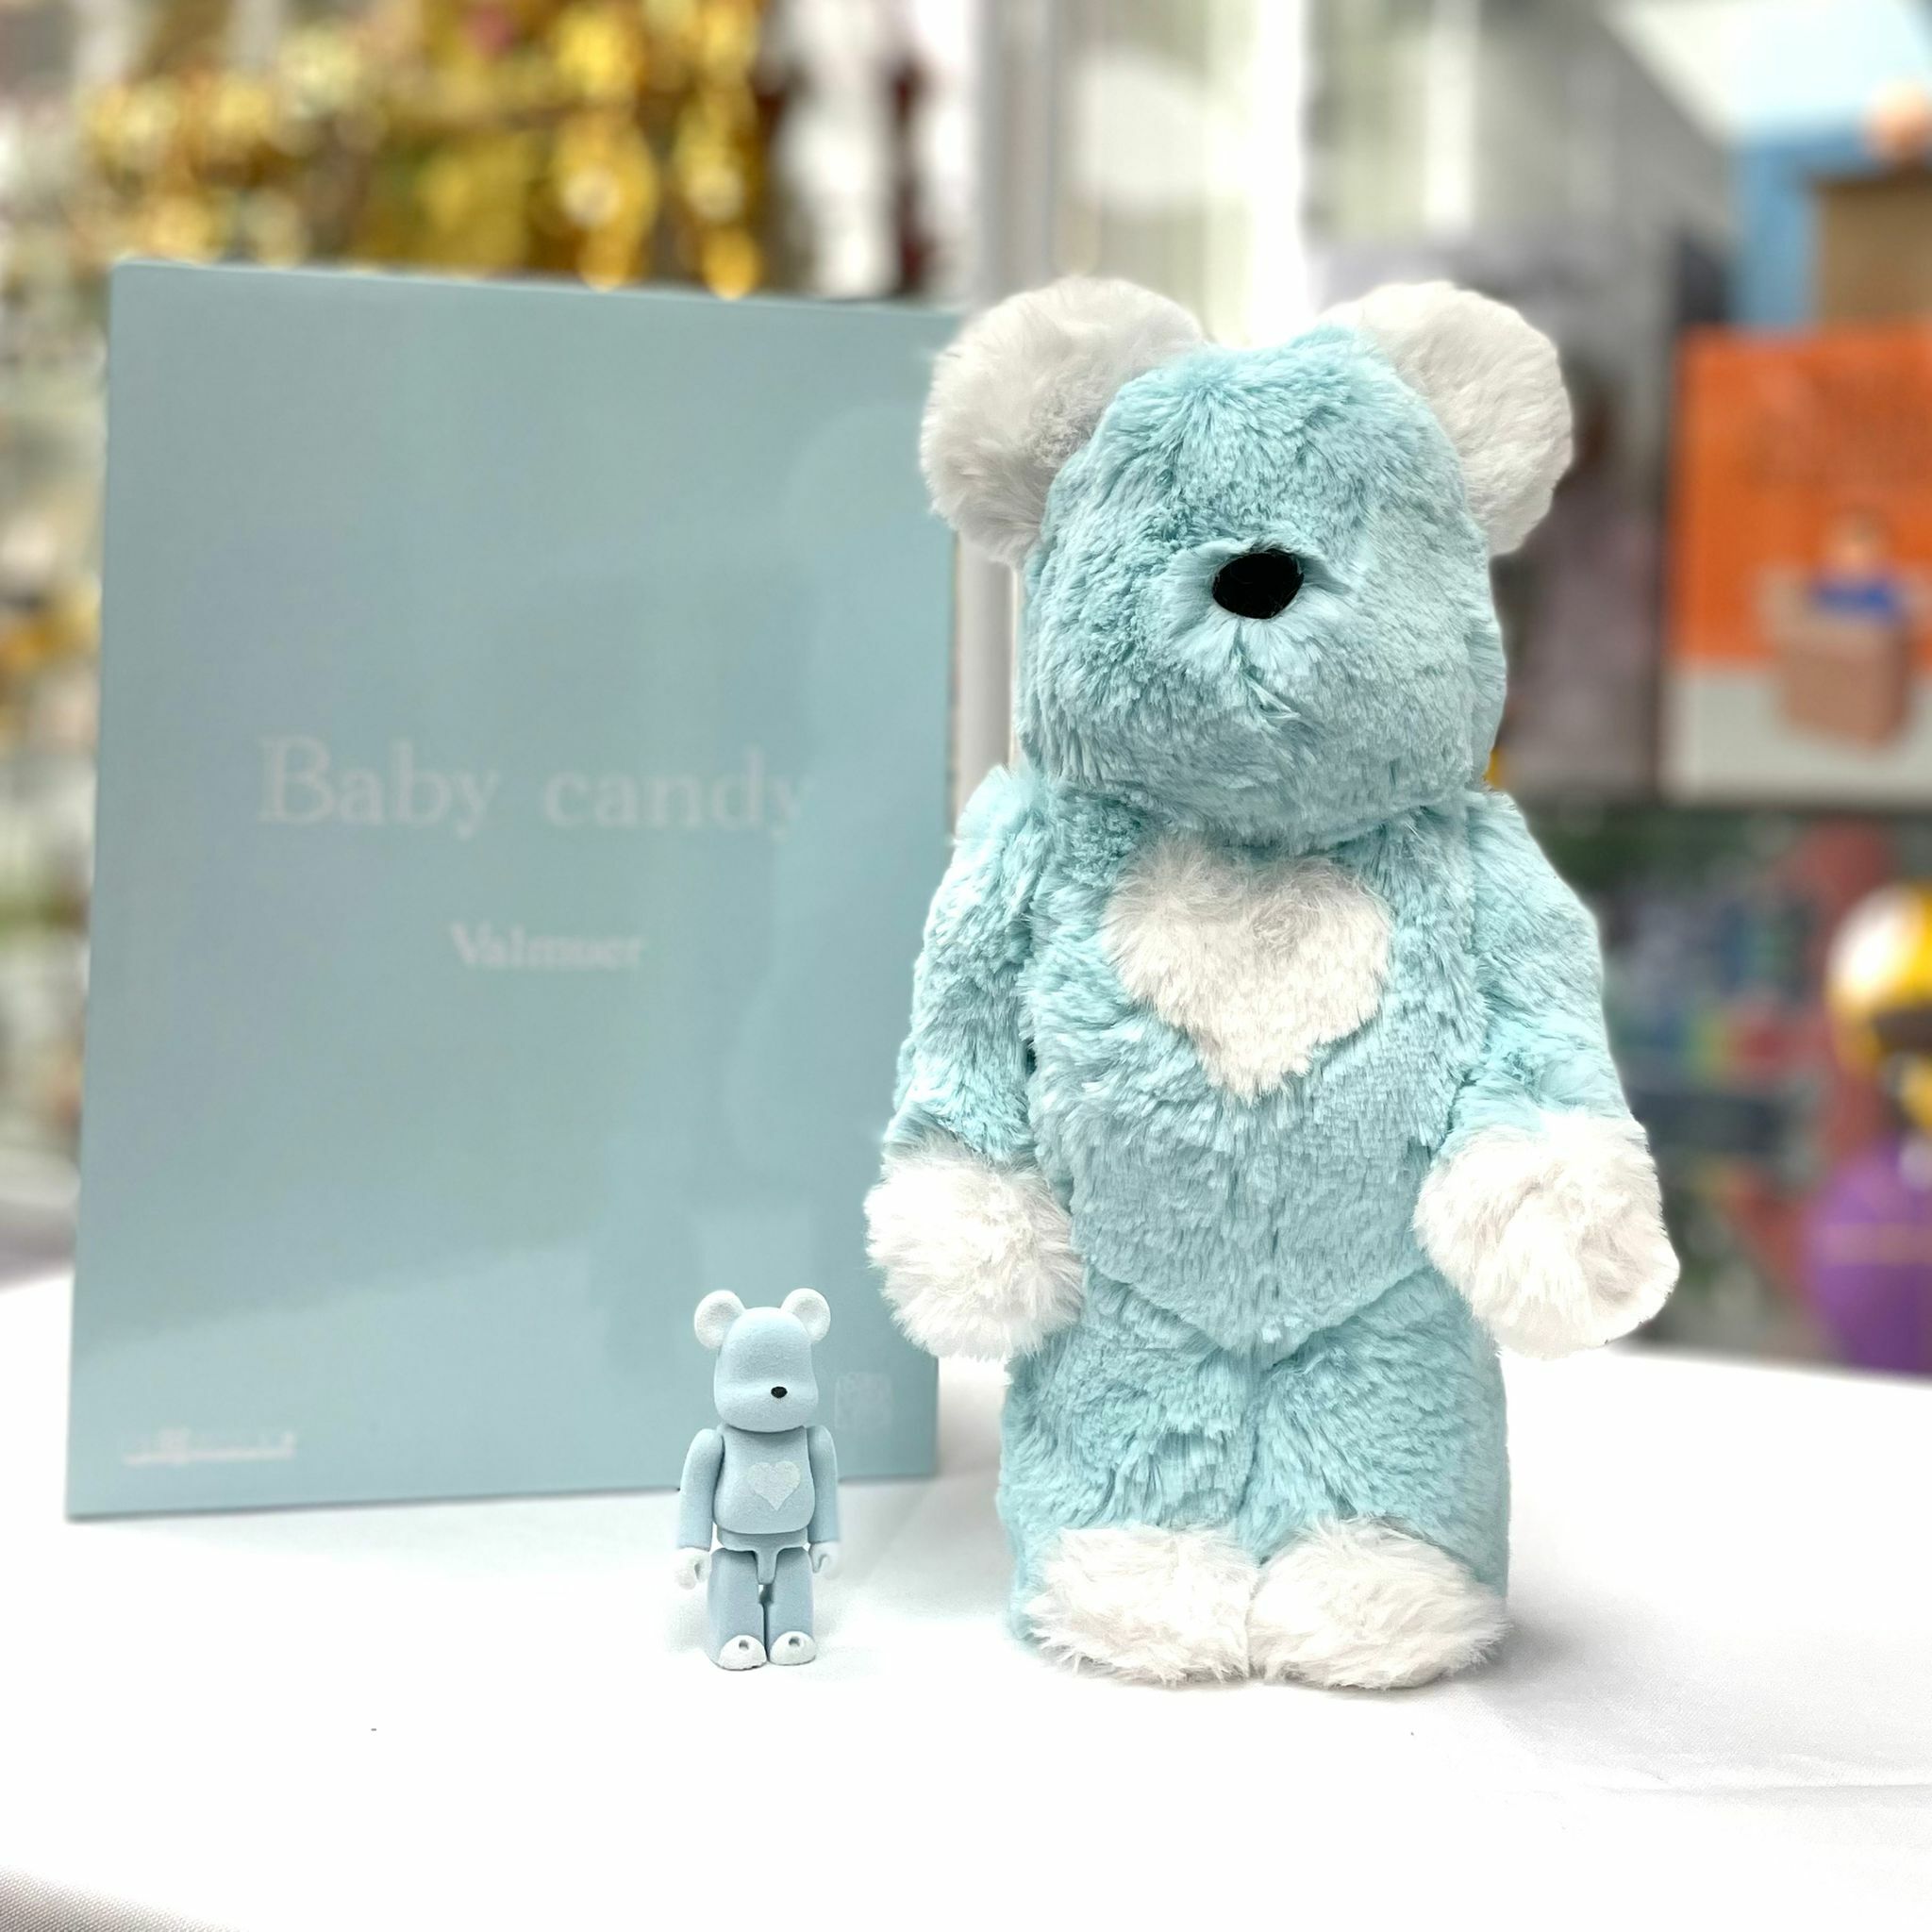 100%+400% Be@rbrick Valmuer Baby candy